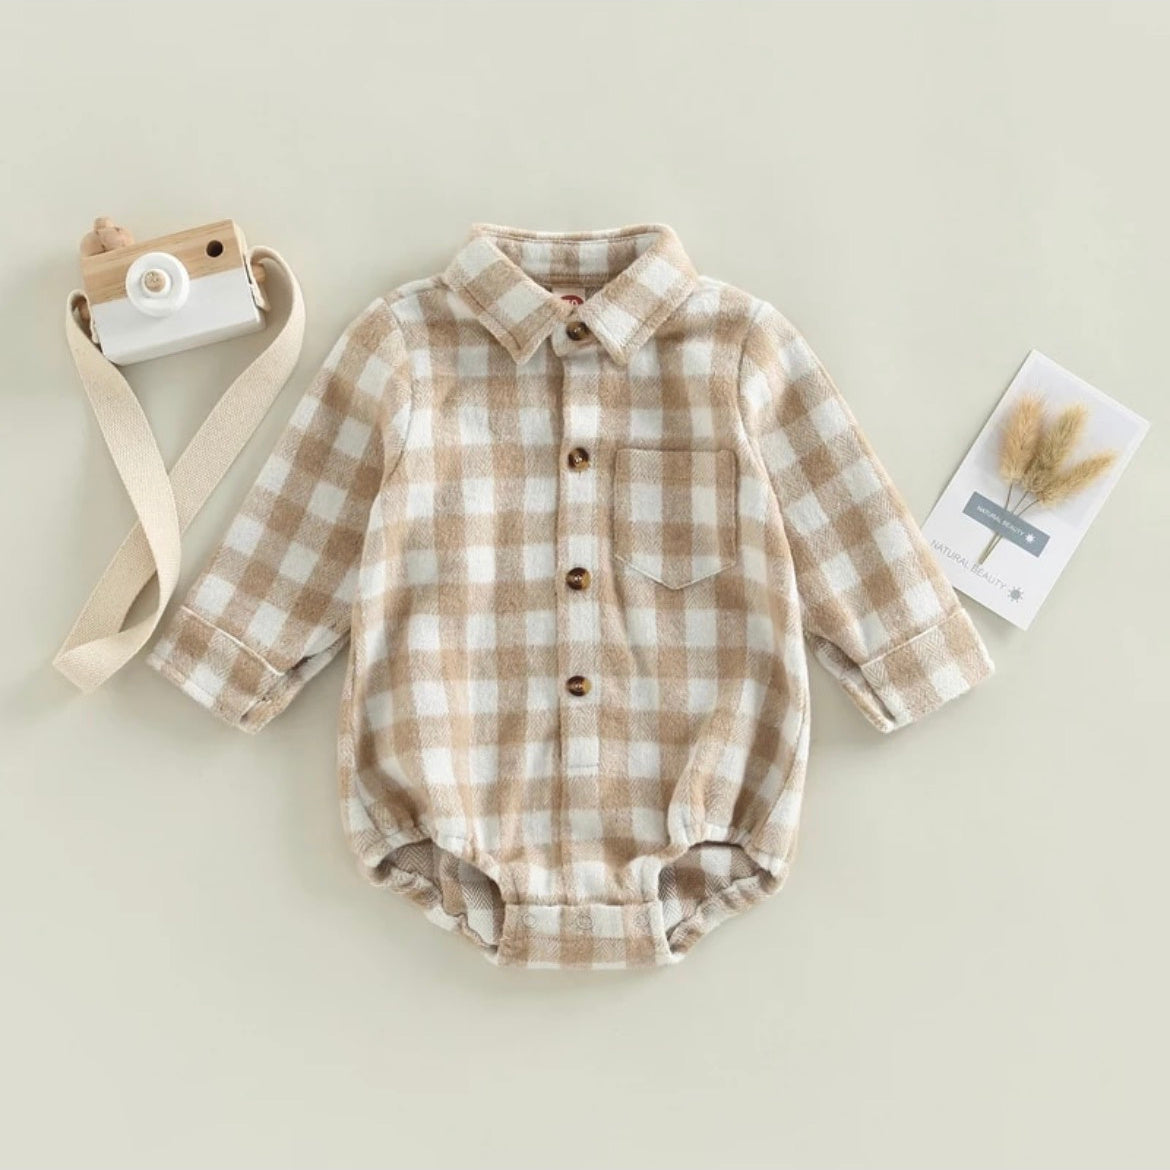 brown check flannel romper with a collar, buttons down the chest, and a pocket over the heart area.